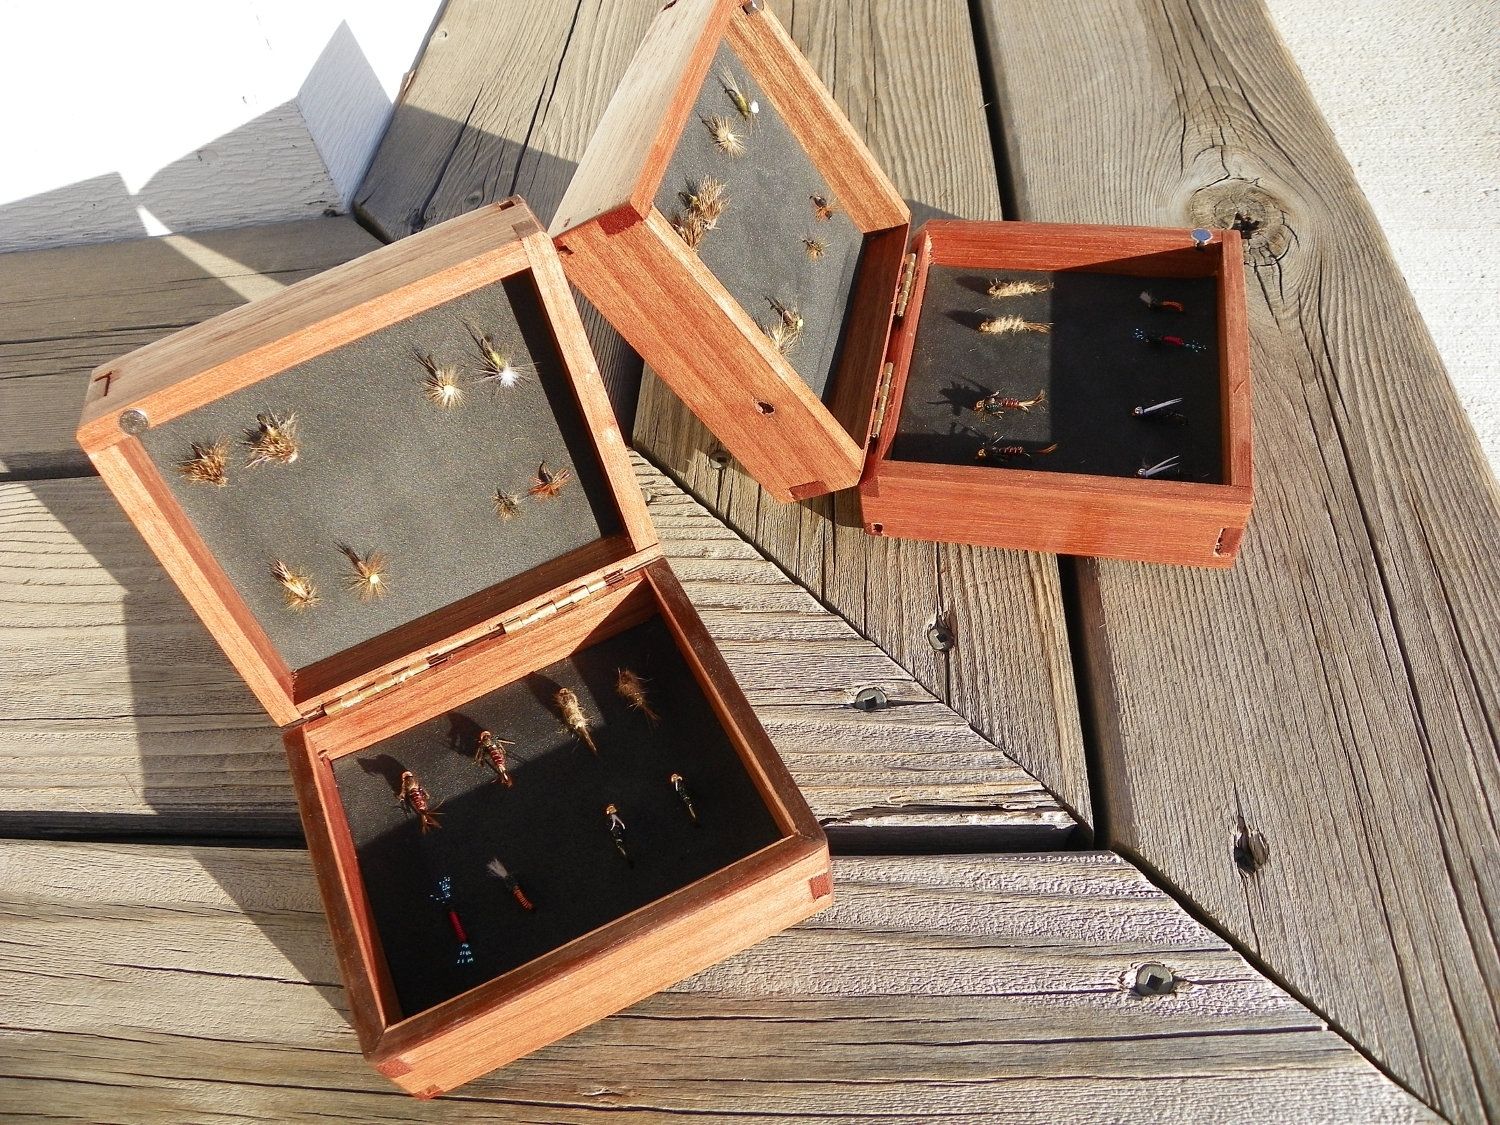 Hand Crafted Fly Fishing Boxes With Fly Selection Made From Reclaimed  Materials by Elegant Woodworking Gifts